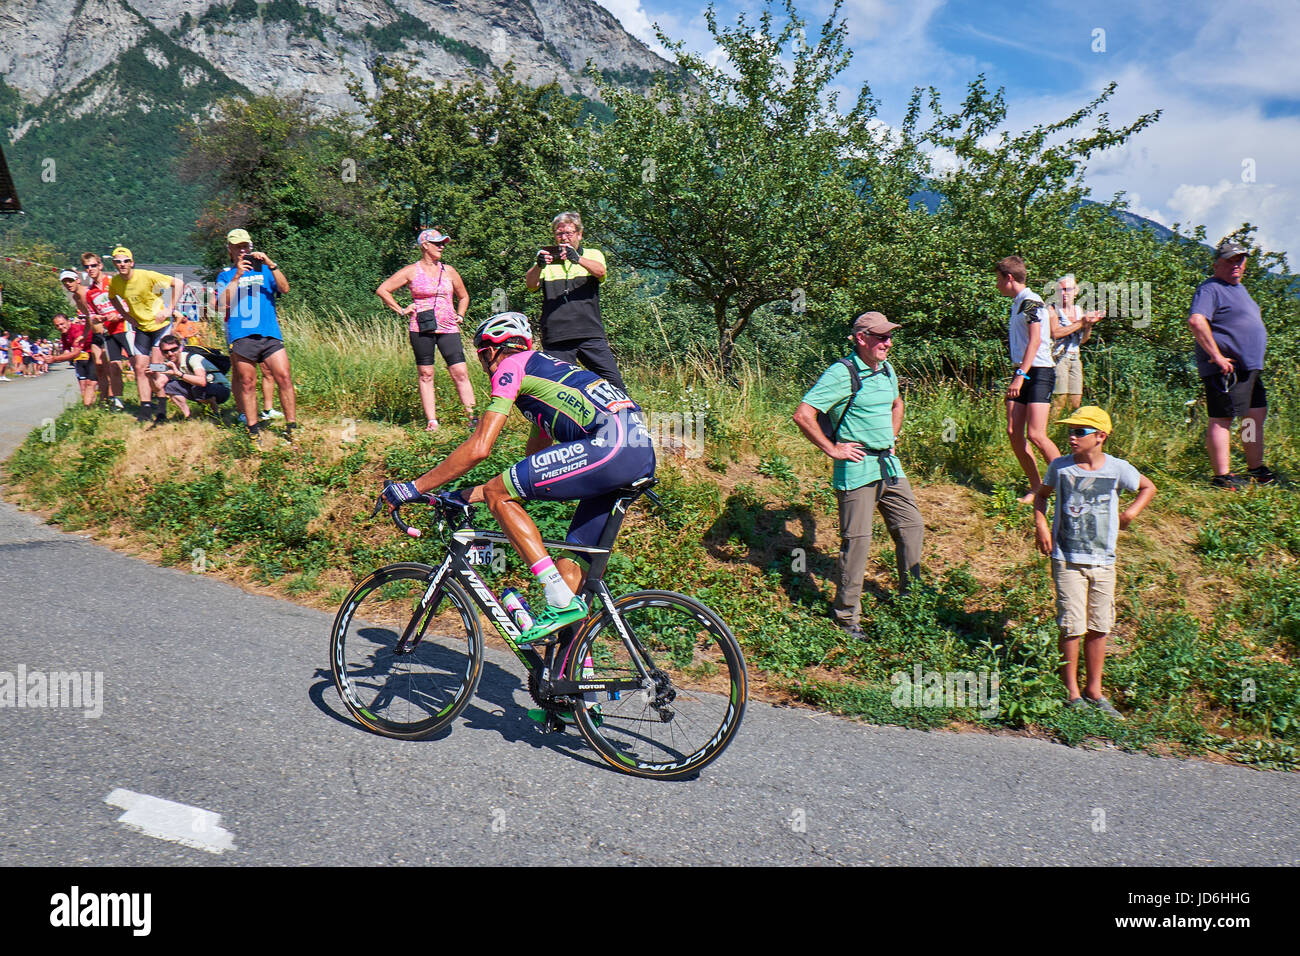 MONTVERNIER, FRANCE - JULY 23, 2015: Ruben Plaza Molina, from team Lampre, in a hairpin turn on the mountain roads on his way up Montvernier in the To Stock Photo